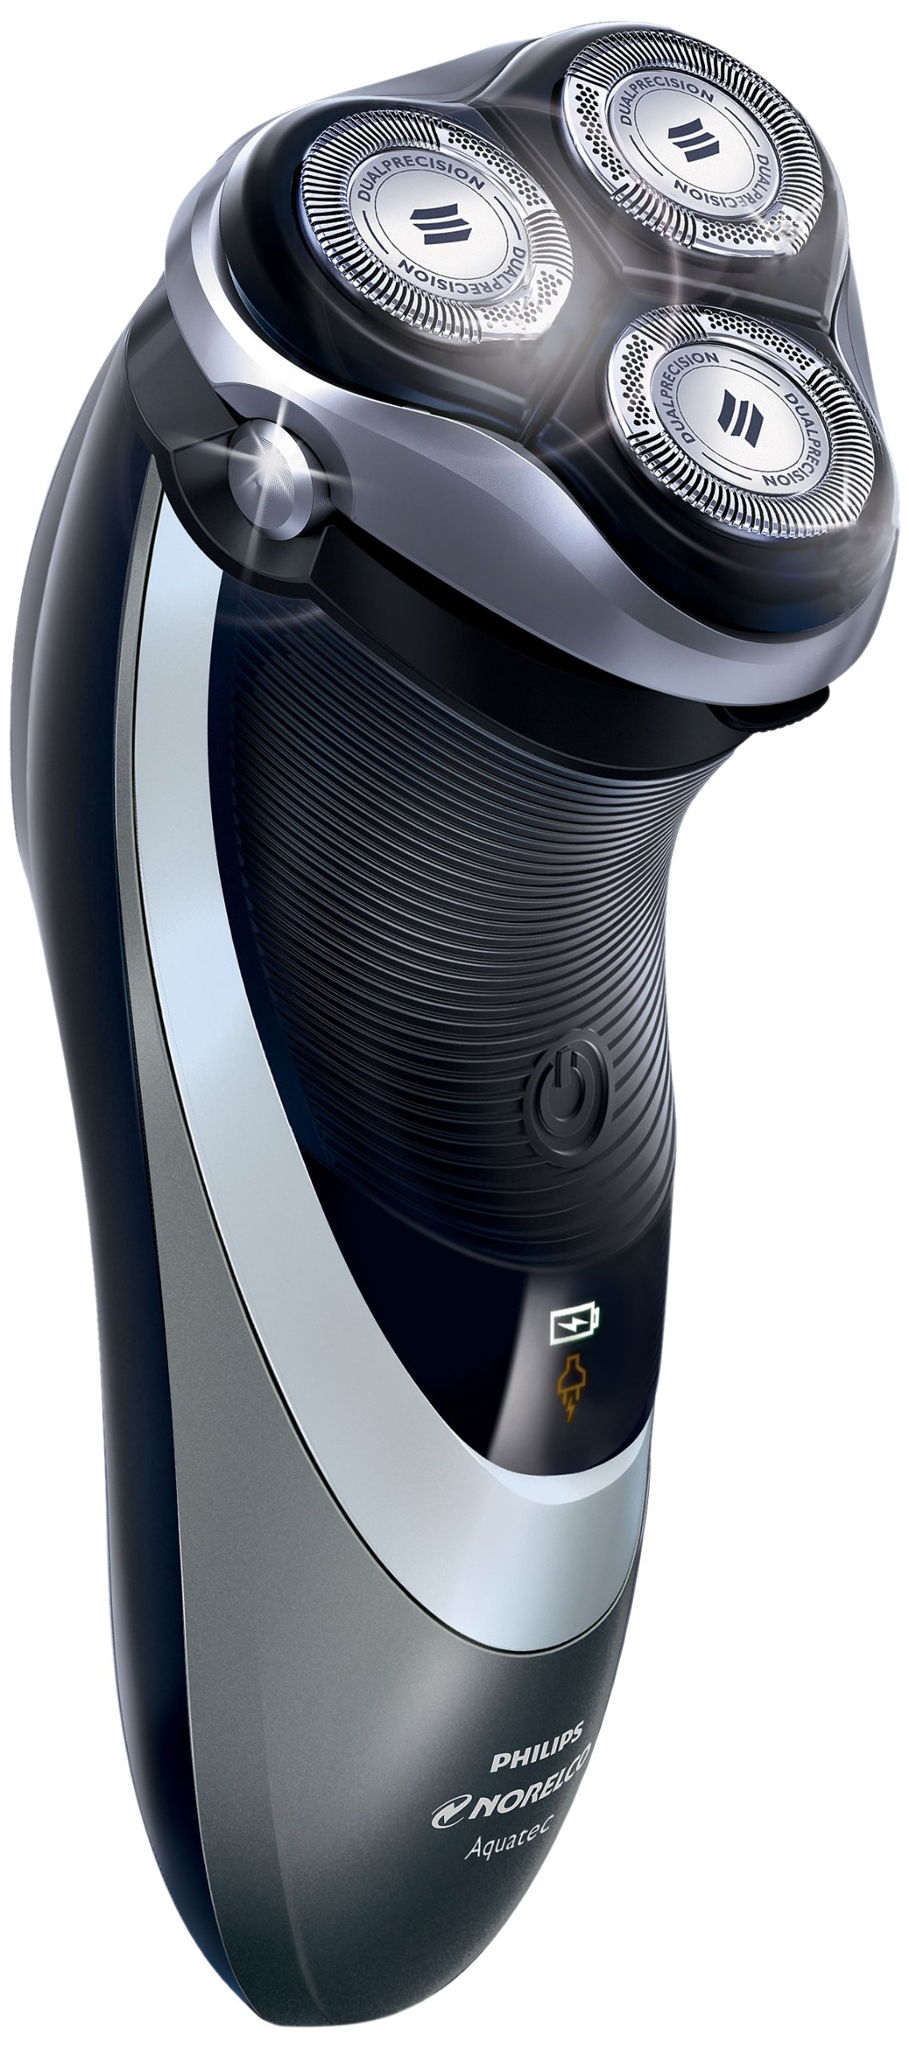 philips norelco shaver 4500 model